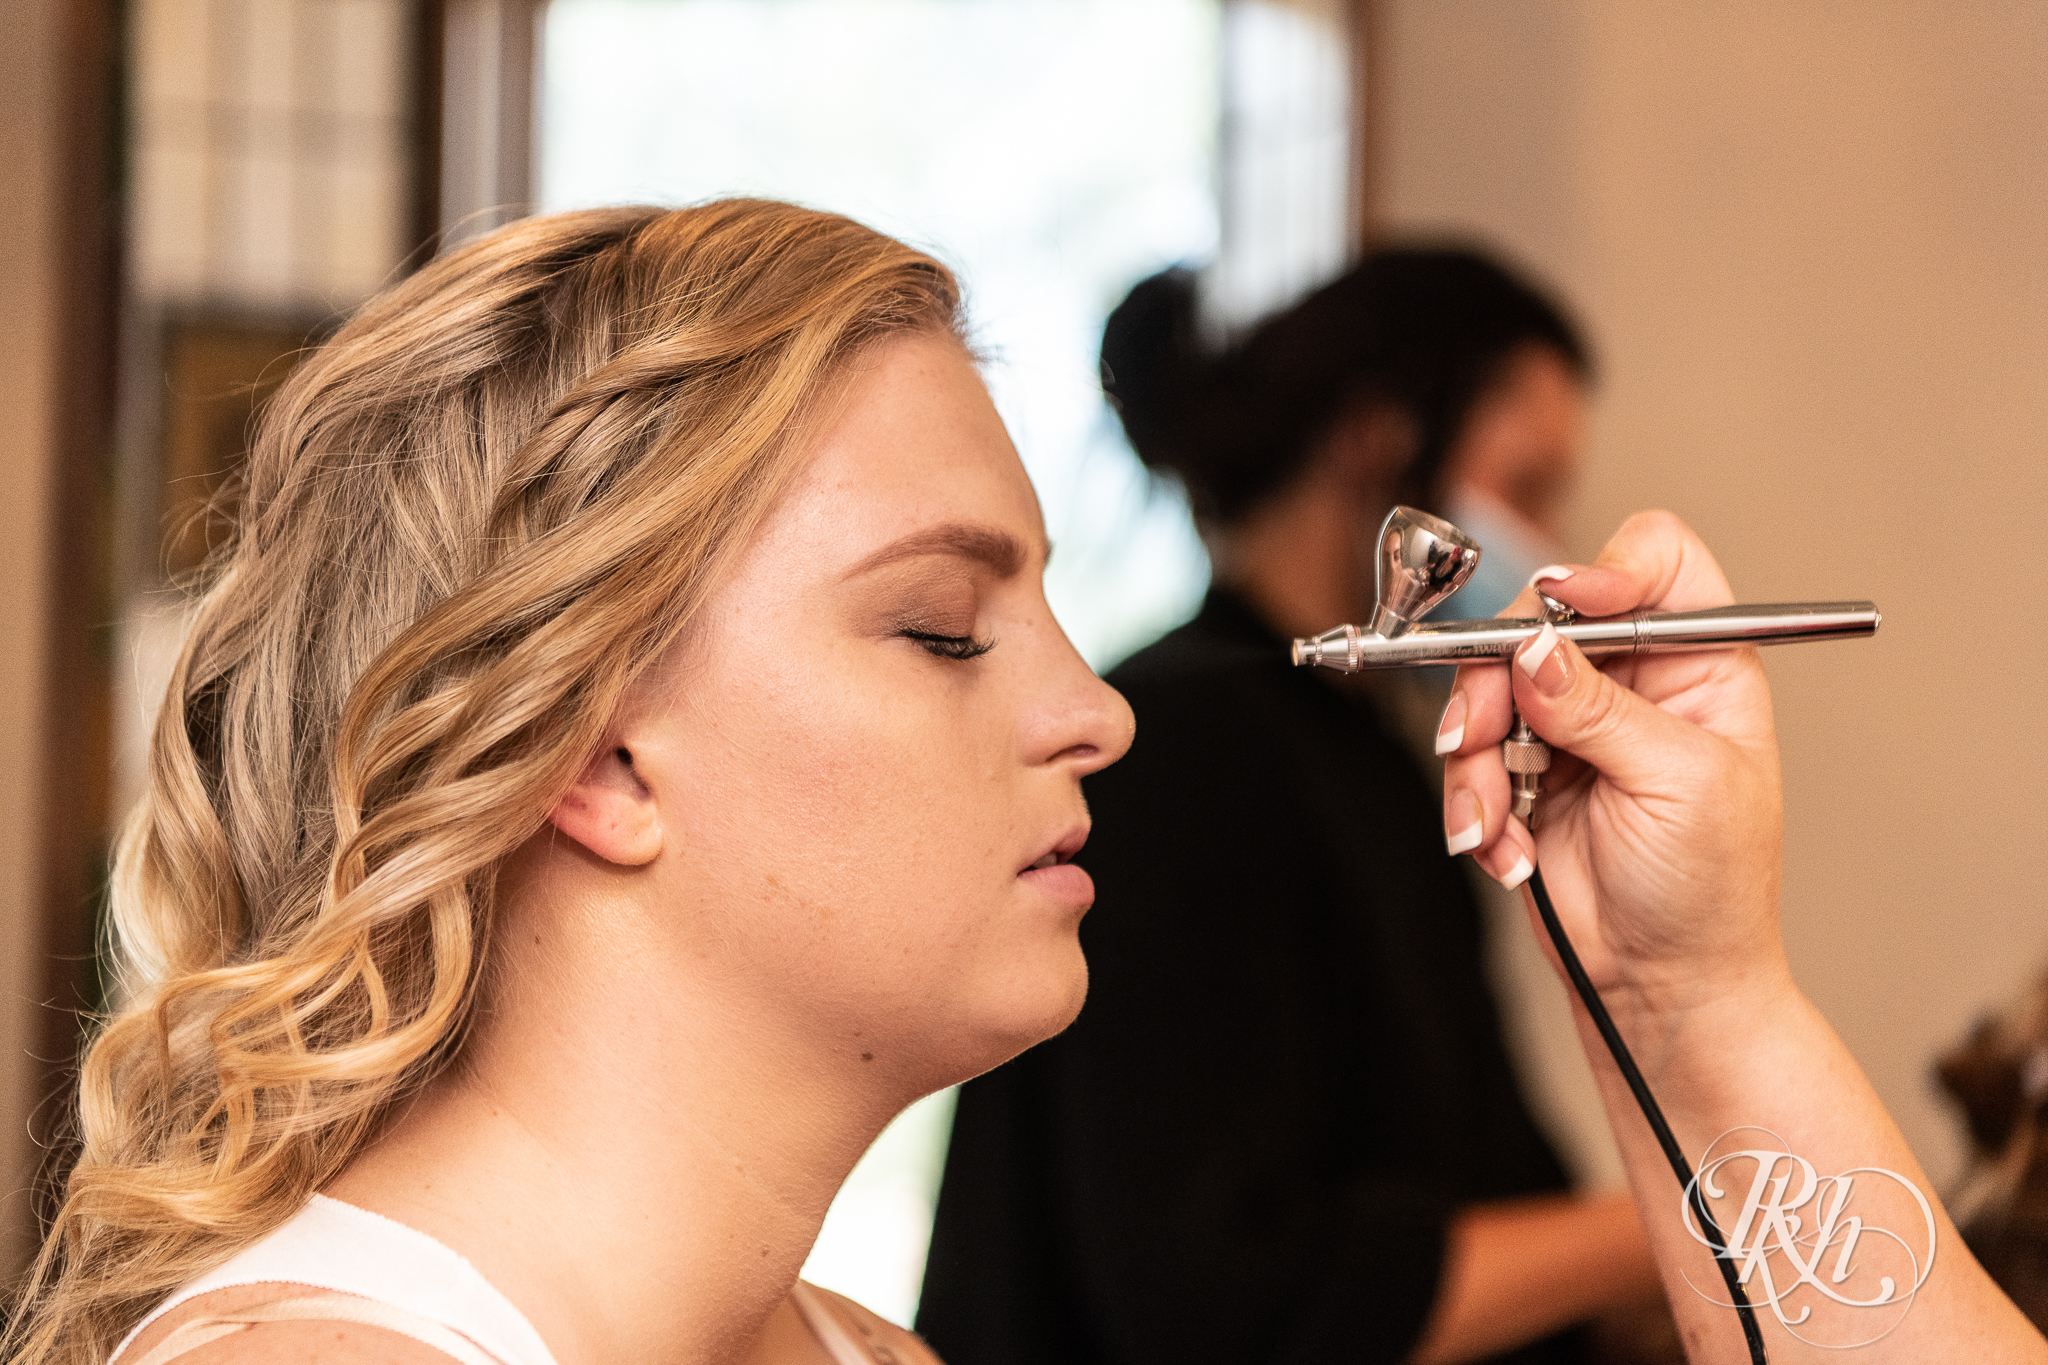 Bride getting makeup done before wedding at Weddings at the Broz in New Prague, Minnesota.